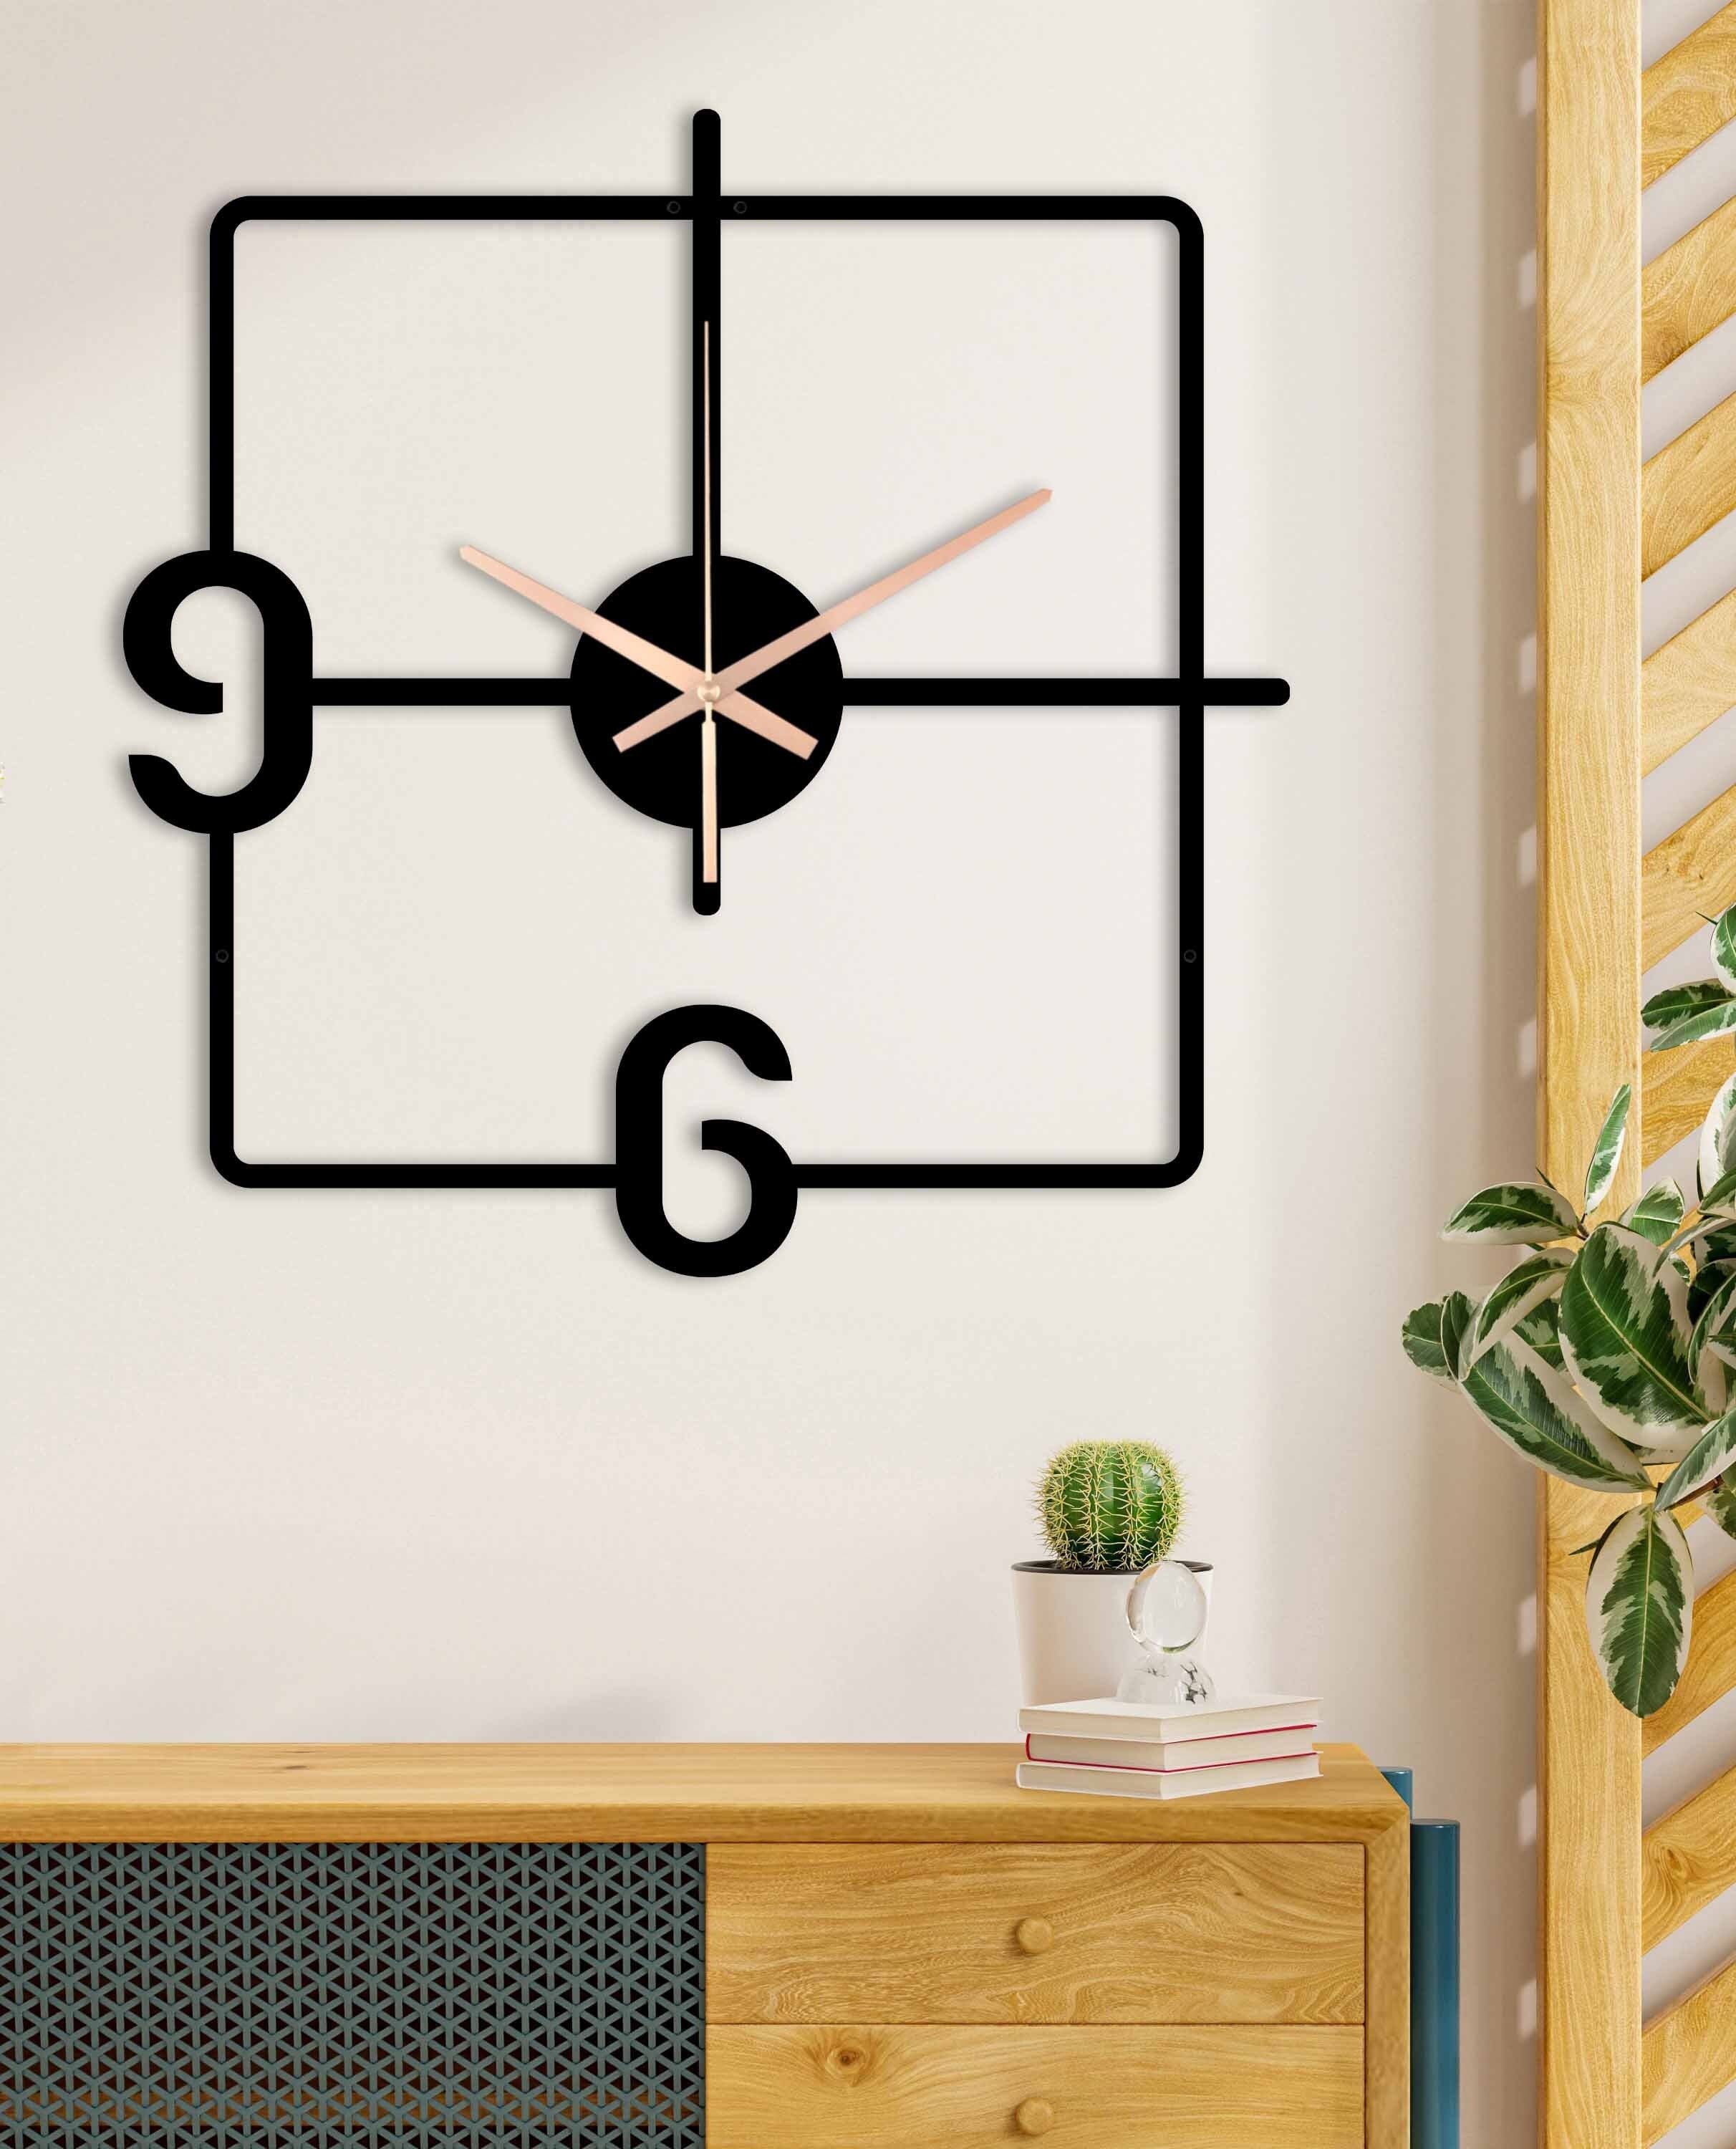 Large Square Wall Clock, Oversized Wall Clock, Unique Wall Clock, Minimalist Clock, Black Wall Clock, Metal Wall Clock, Silent Wall Clock